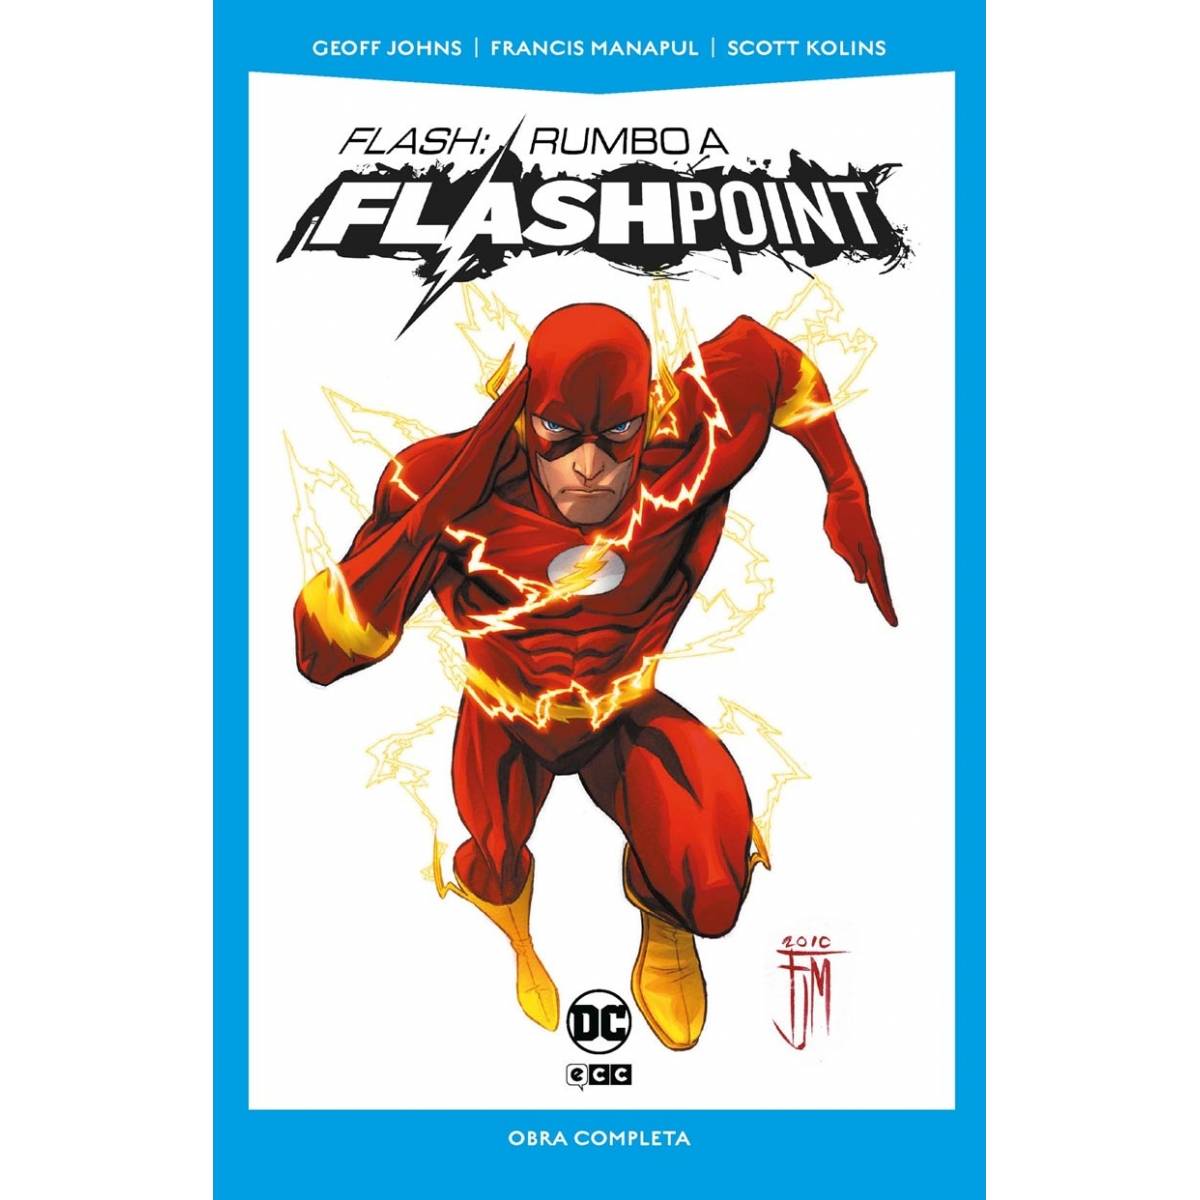 Flash Rumbo a Flashpoint...